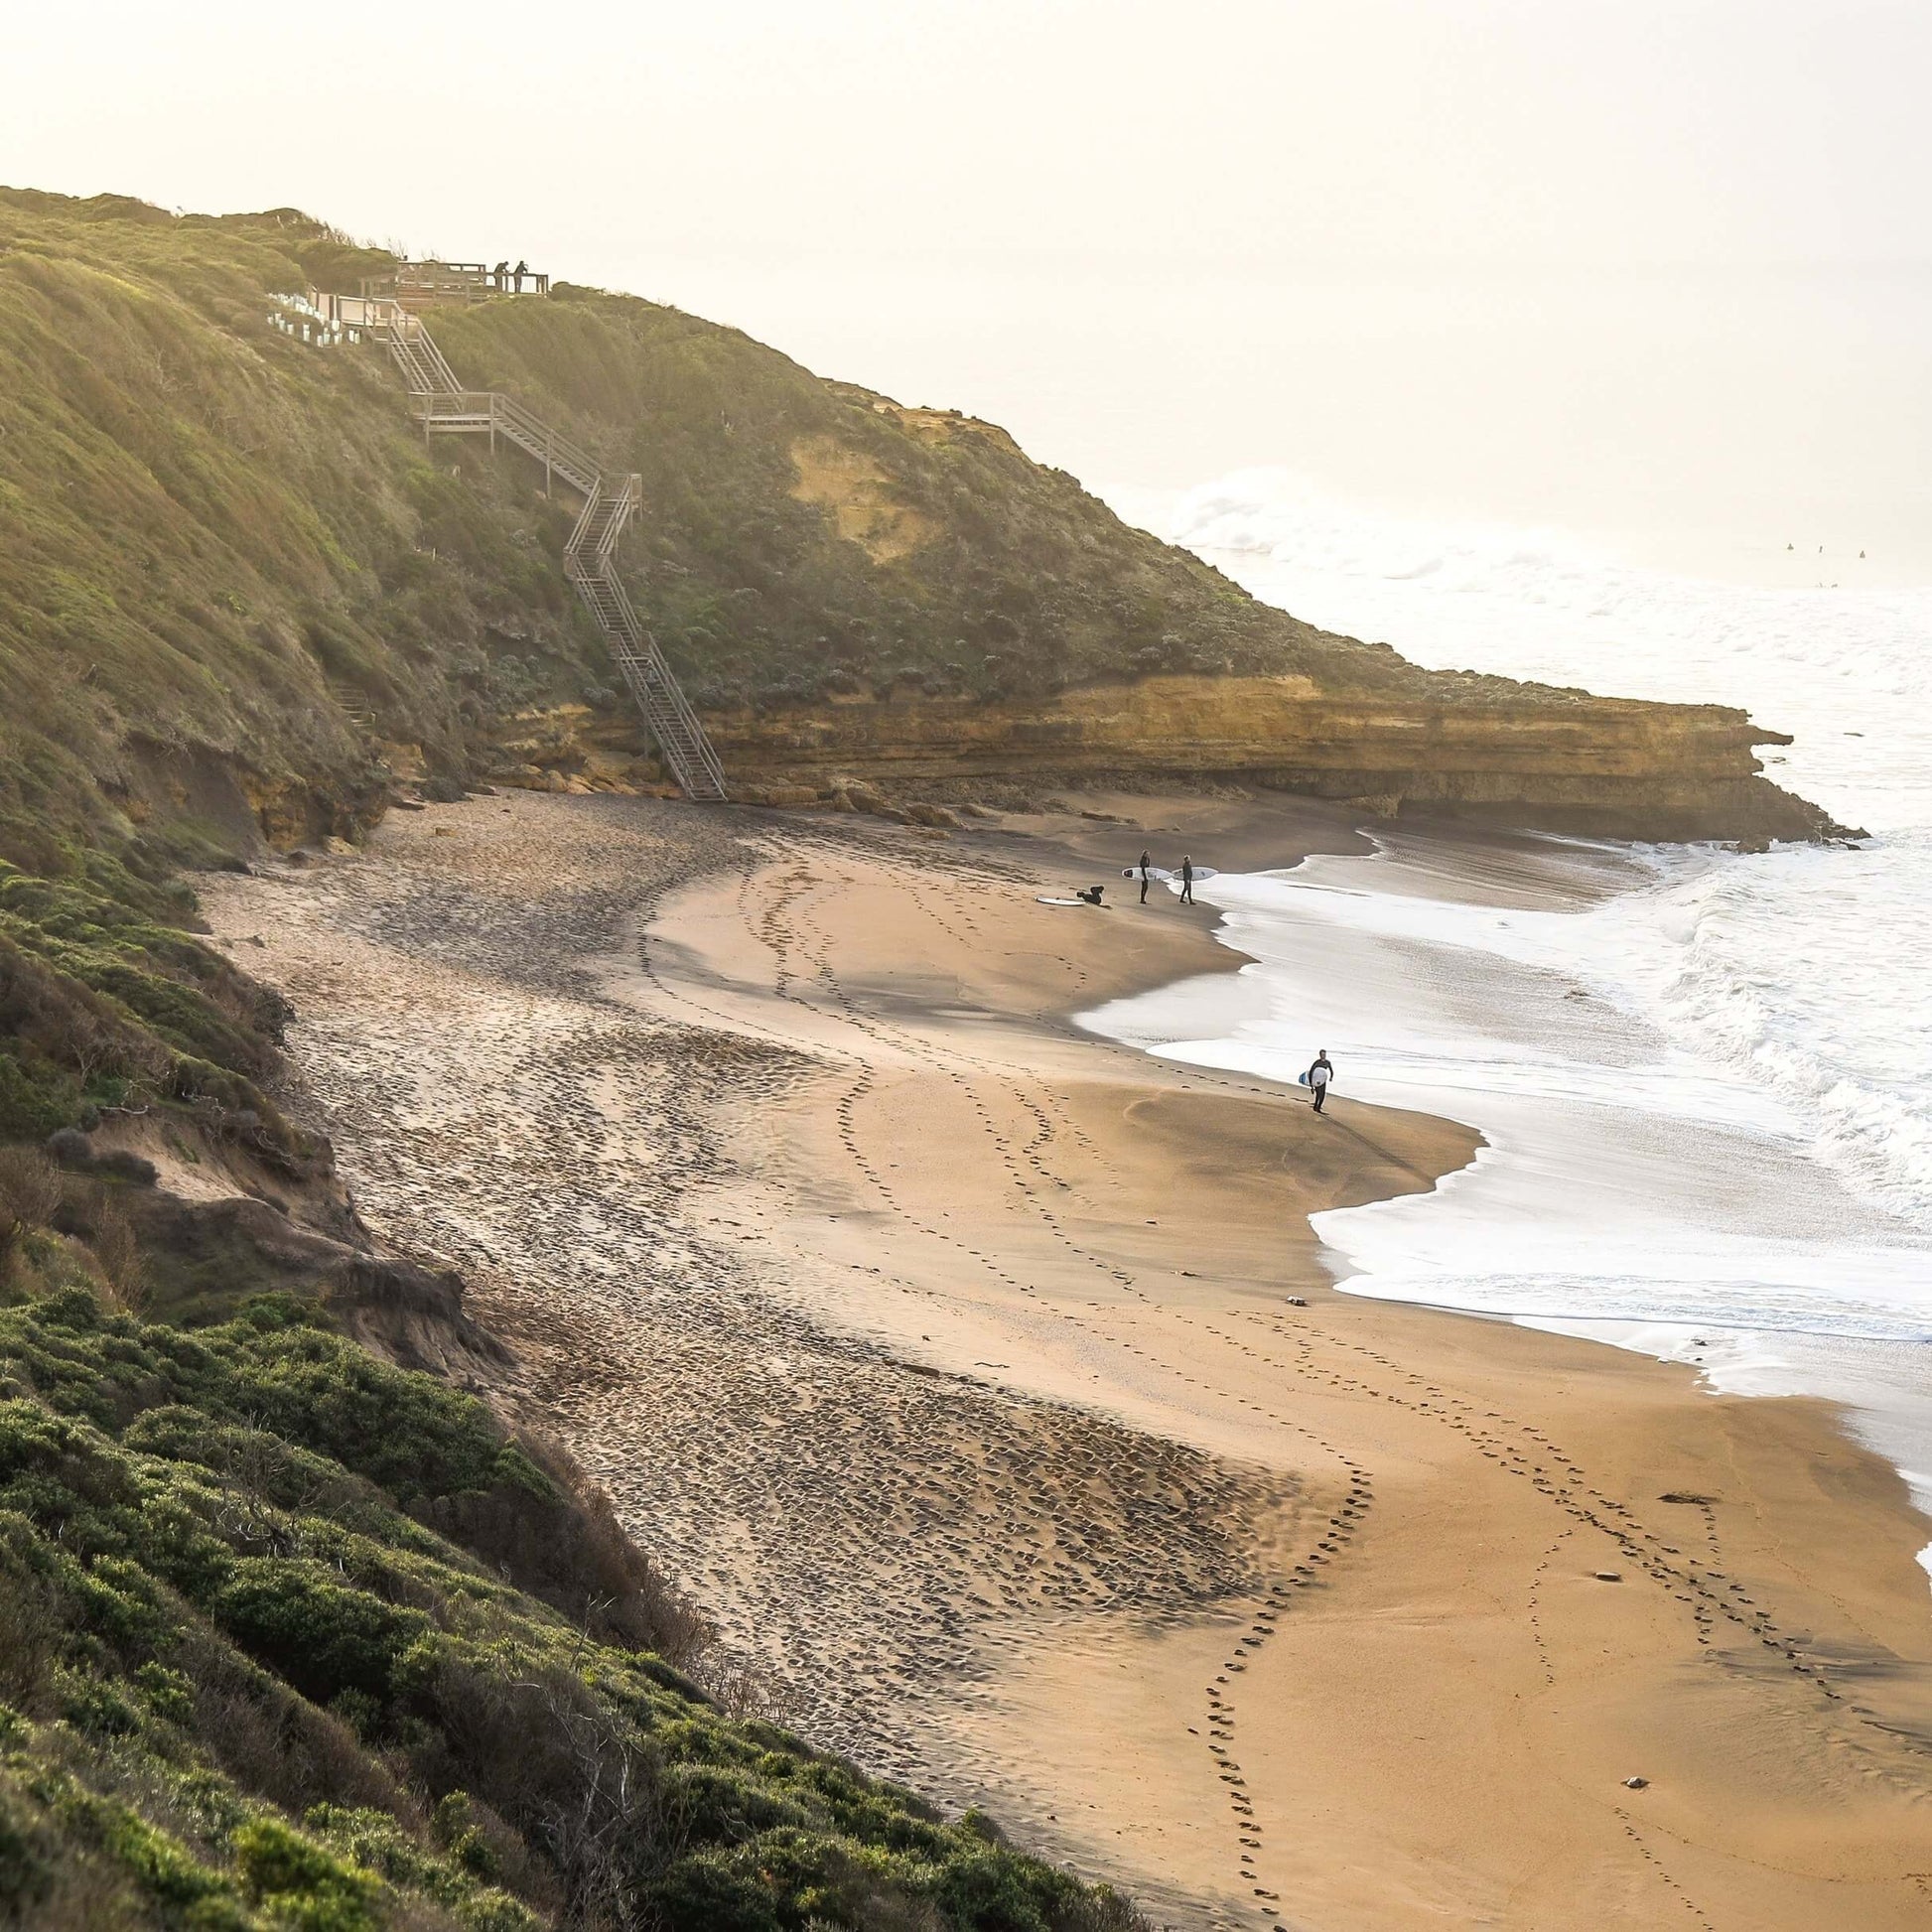 Heli-Surfing Tour to Torquay and Bells Beach from Melbourne with Rotor One